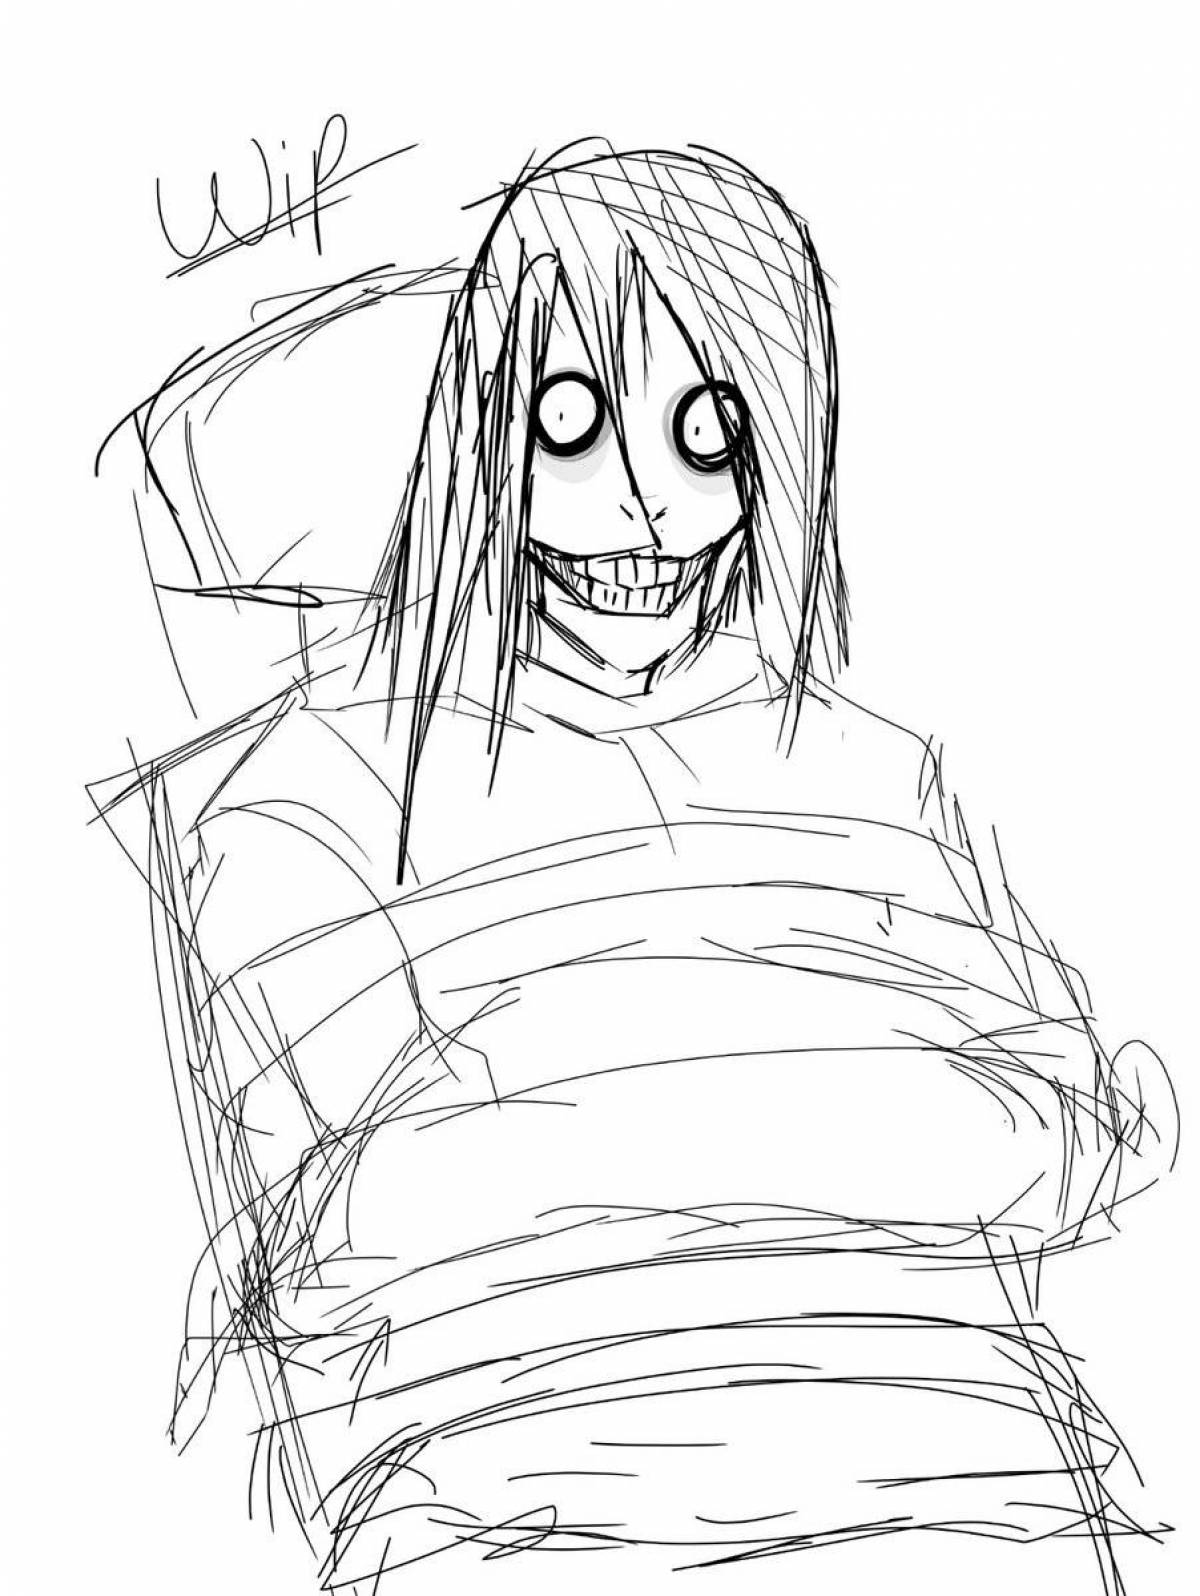 Coloring page amazing jeff the killer